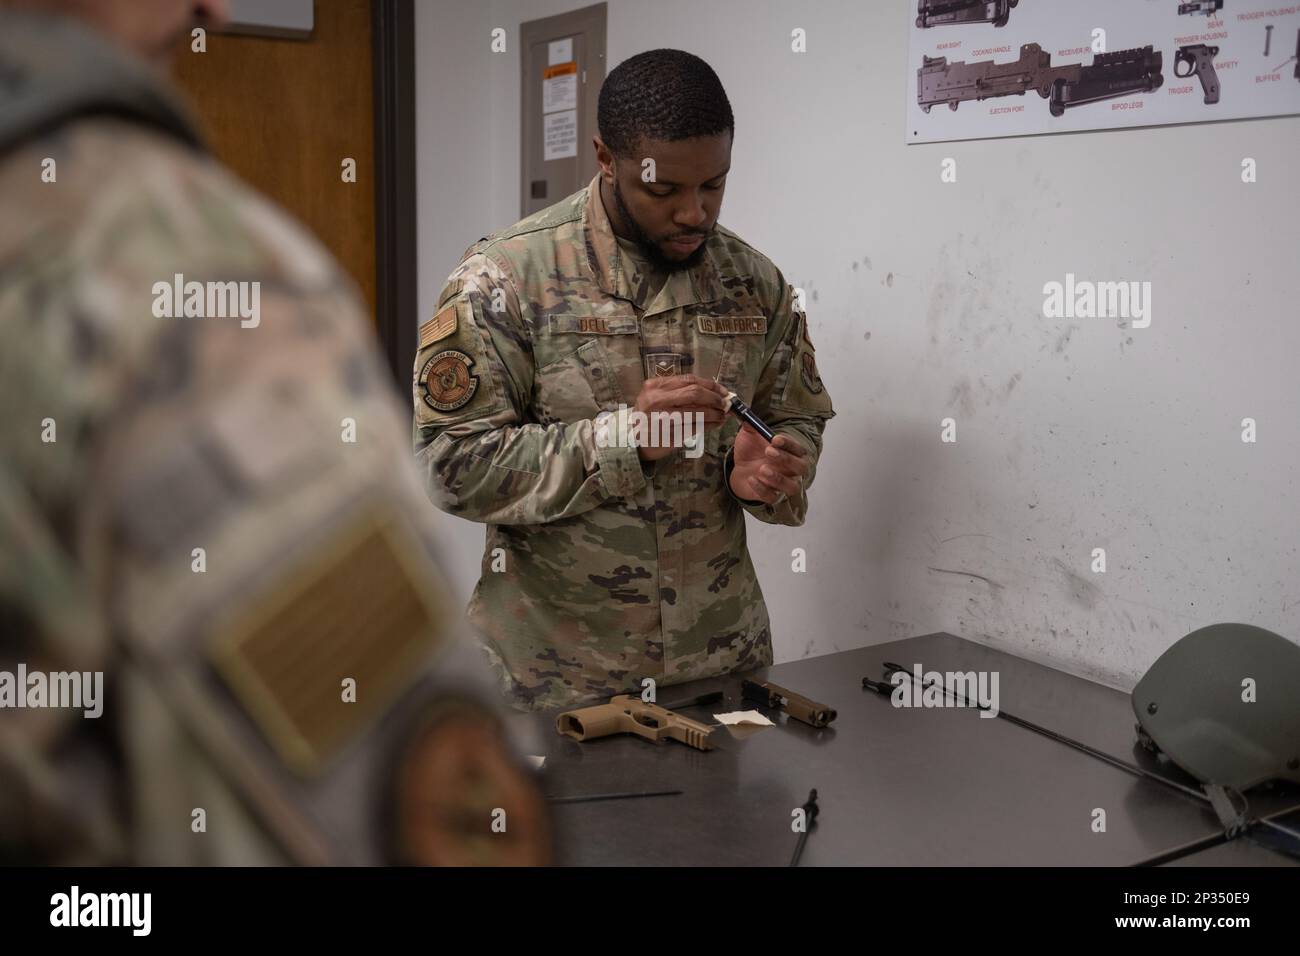 U.S. Air Force Senior Airman Jamarcus Bell, 41st Rescue Generation Squadron weapons journeyman, cleans an M18 Modular Handgun System after a weapons qualification class at Moody Air Force Base, Georgia, Jan. 5, 2022. Standard gun cleaning brushes, a cloth and lubricant are all used to brush away debris so the weapon can function smoothly. The main type of lubrication used to wipe down the weapon is cleaner lubricant preservative. Stock Photo